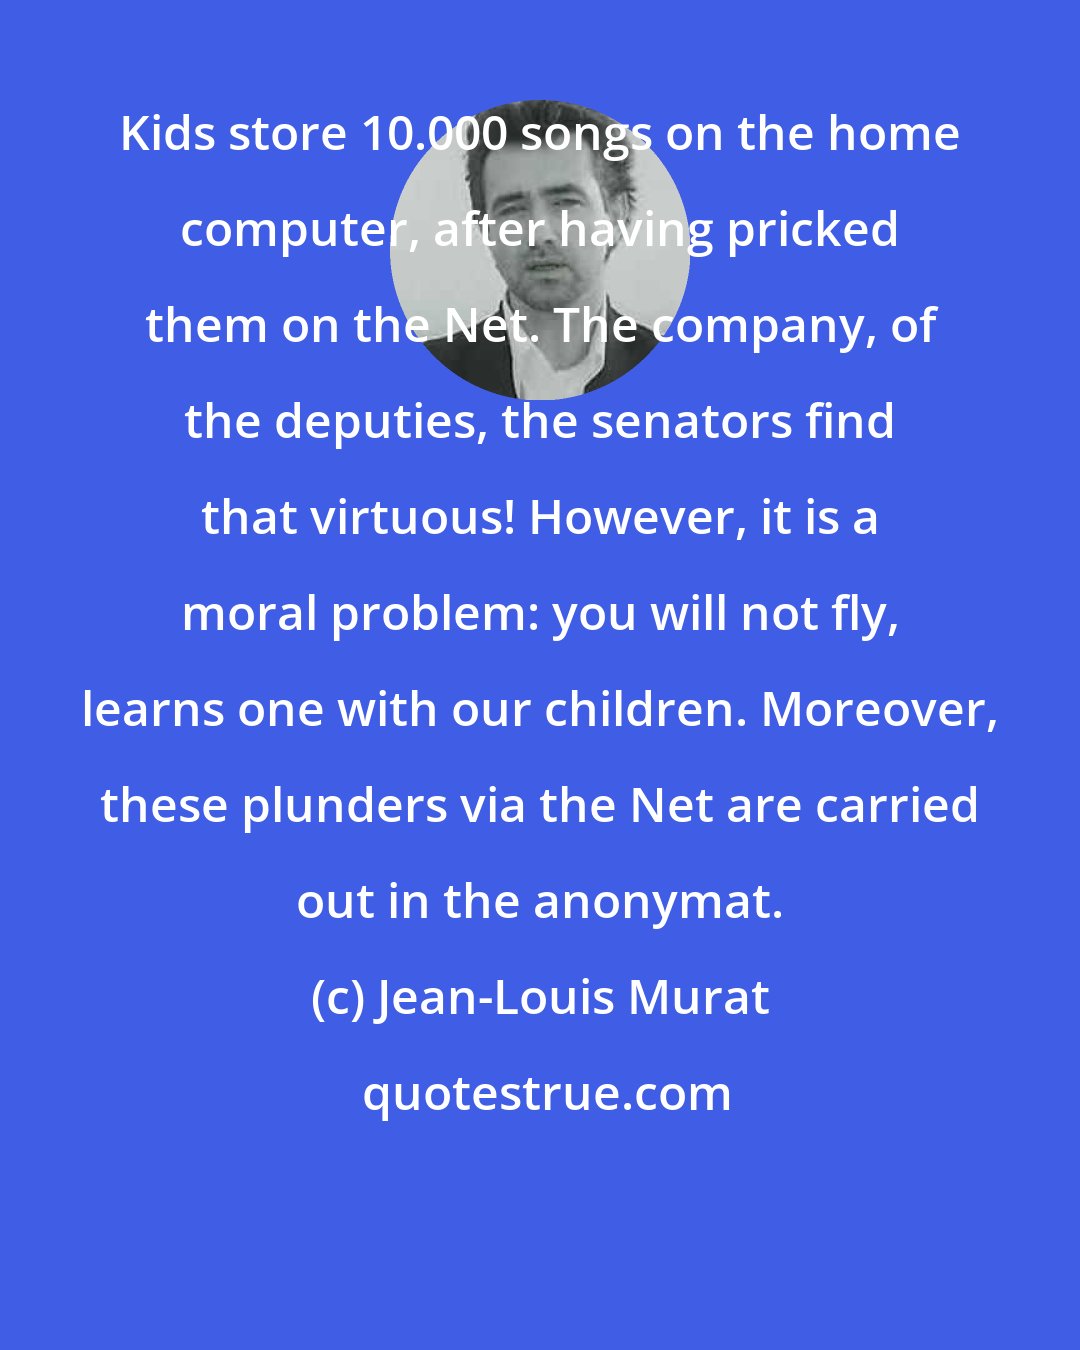 Jean-Louis Murat: Kids store 10.000 songs on the home computer, after having pricked them on the Net. The company, of the deputies, the senators find that virtuous! However, it is a moral problem: you will not fly, learns one with our children. Moreover, these plunders via the Net are carried out in the anonymat.